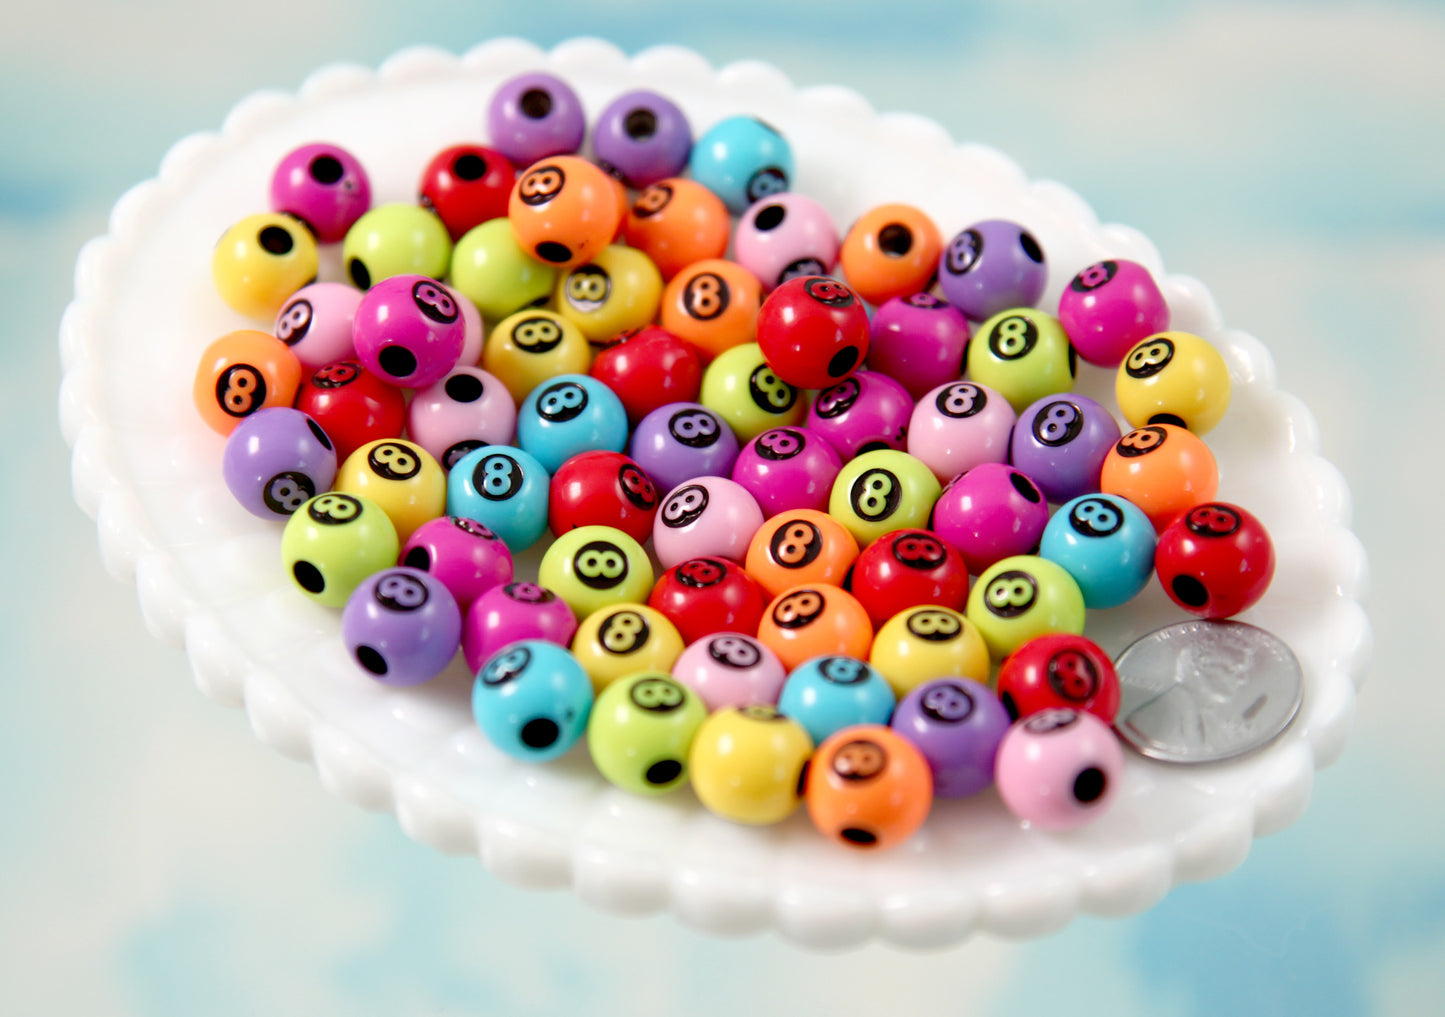 Colorful 8ball Beads - 10mm 8-ball Mixed Color with Black Round Billiard Eight Ball Pool Ball Acrylic or Resin Beads - 65 pc set